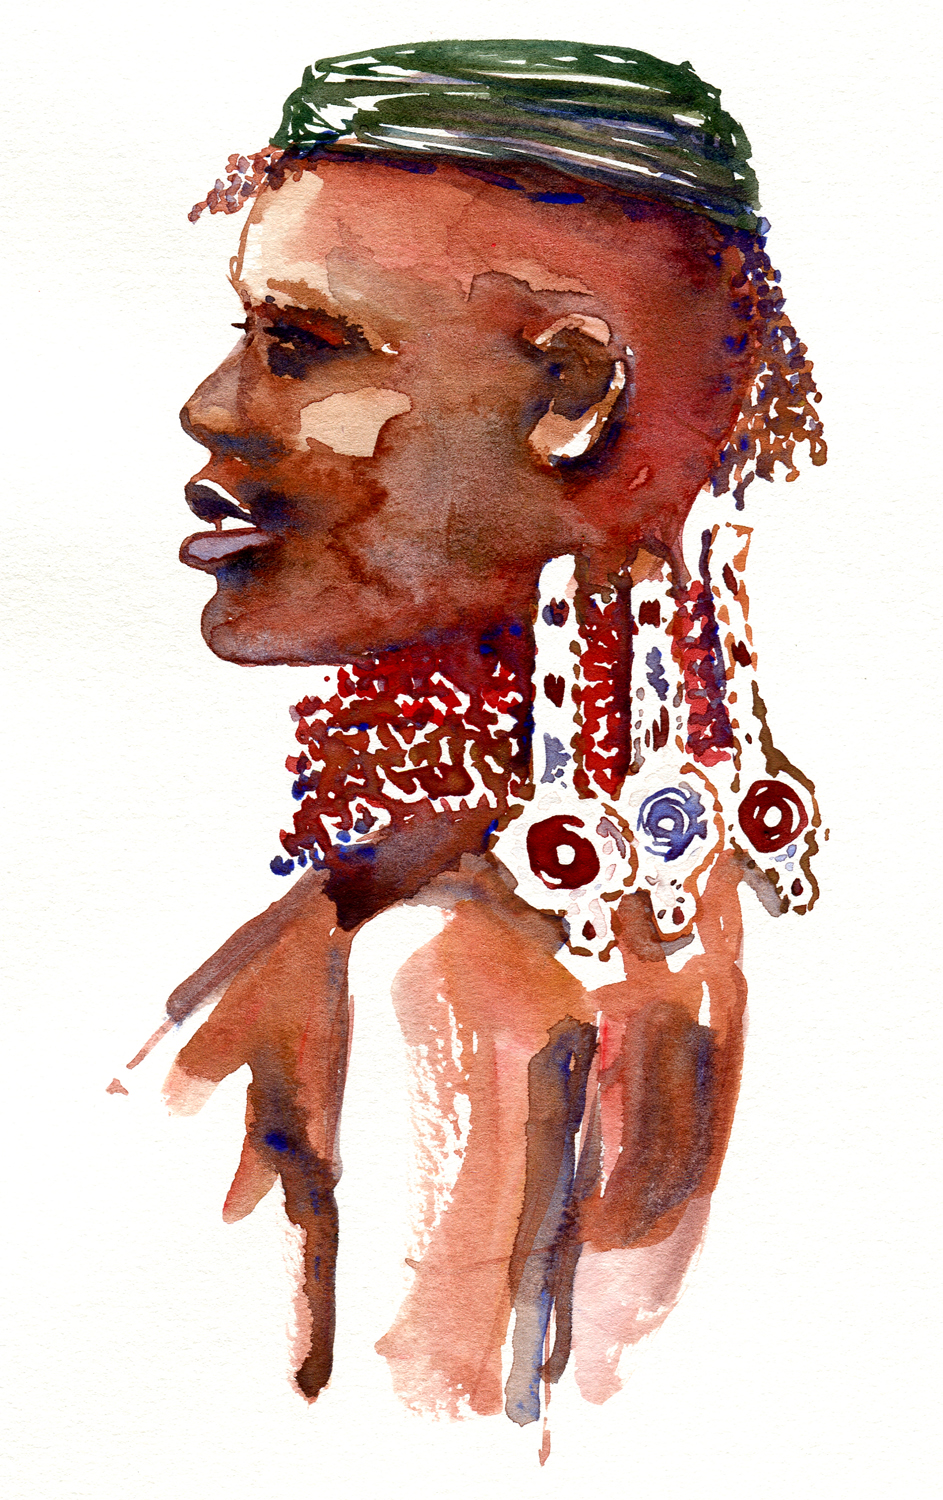 Nomad portrait watercolor by frits ahlefeldt